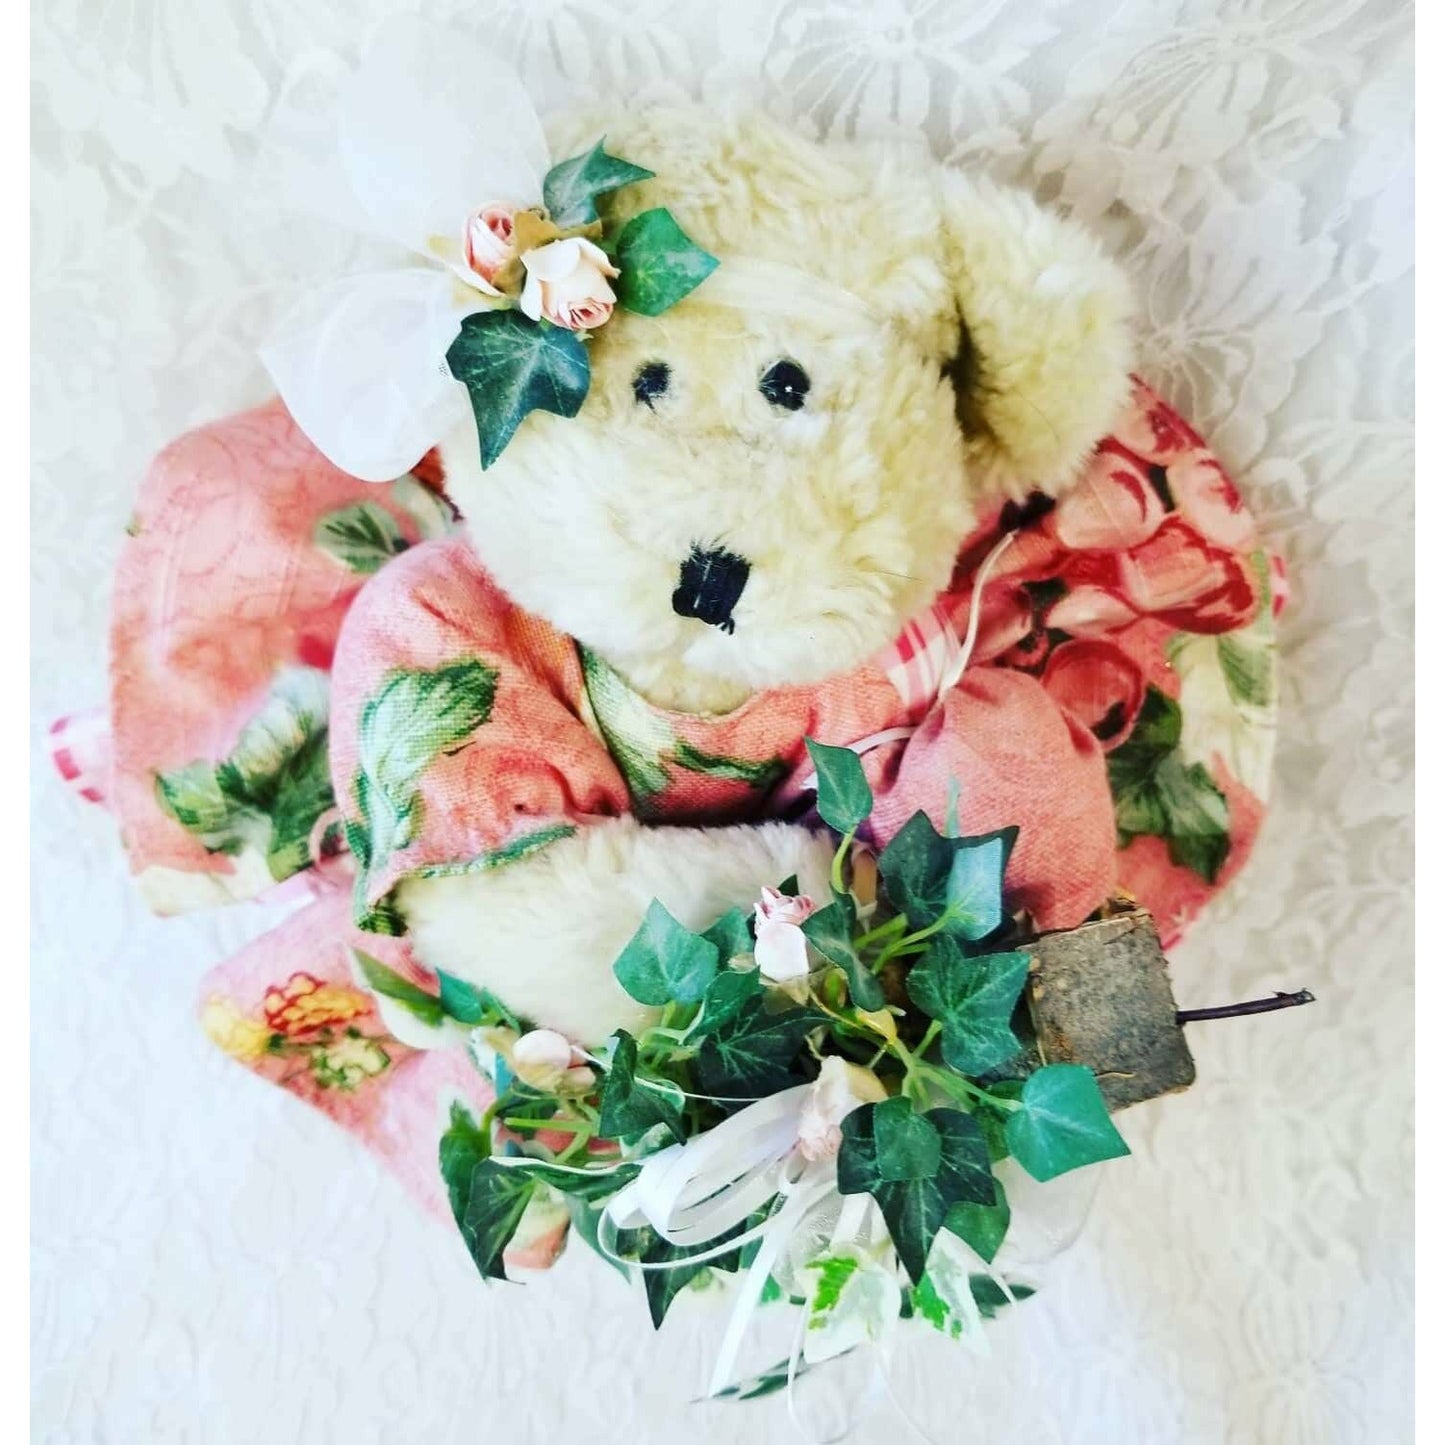 Handmade Teddy Bear ~ OOAK Jointed Art Bear w/ Birdhouse in Hand ~ Jointed, Handmade ~ Unique and Original